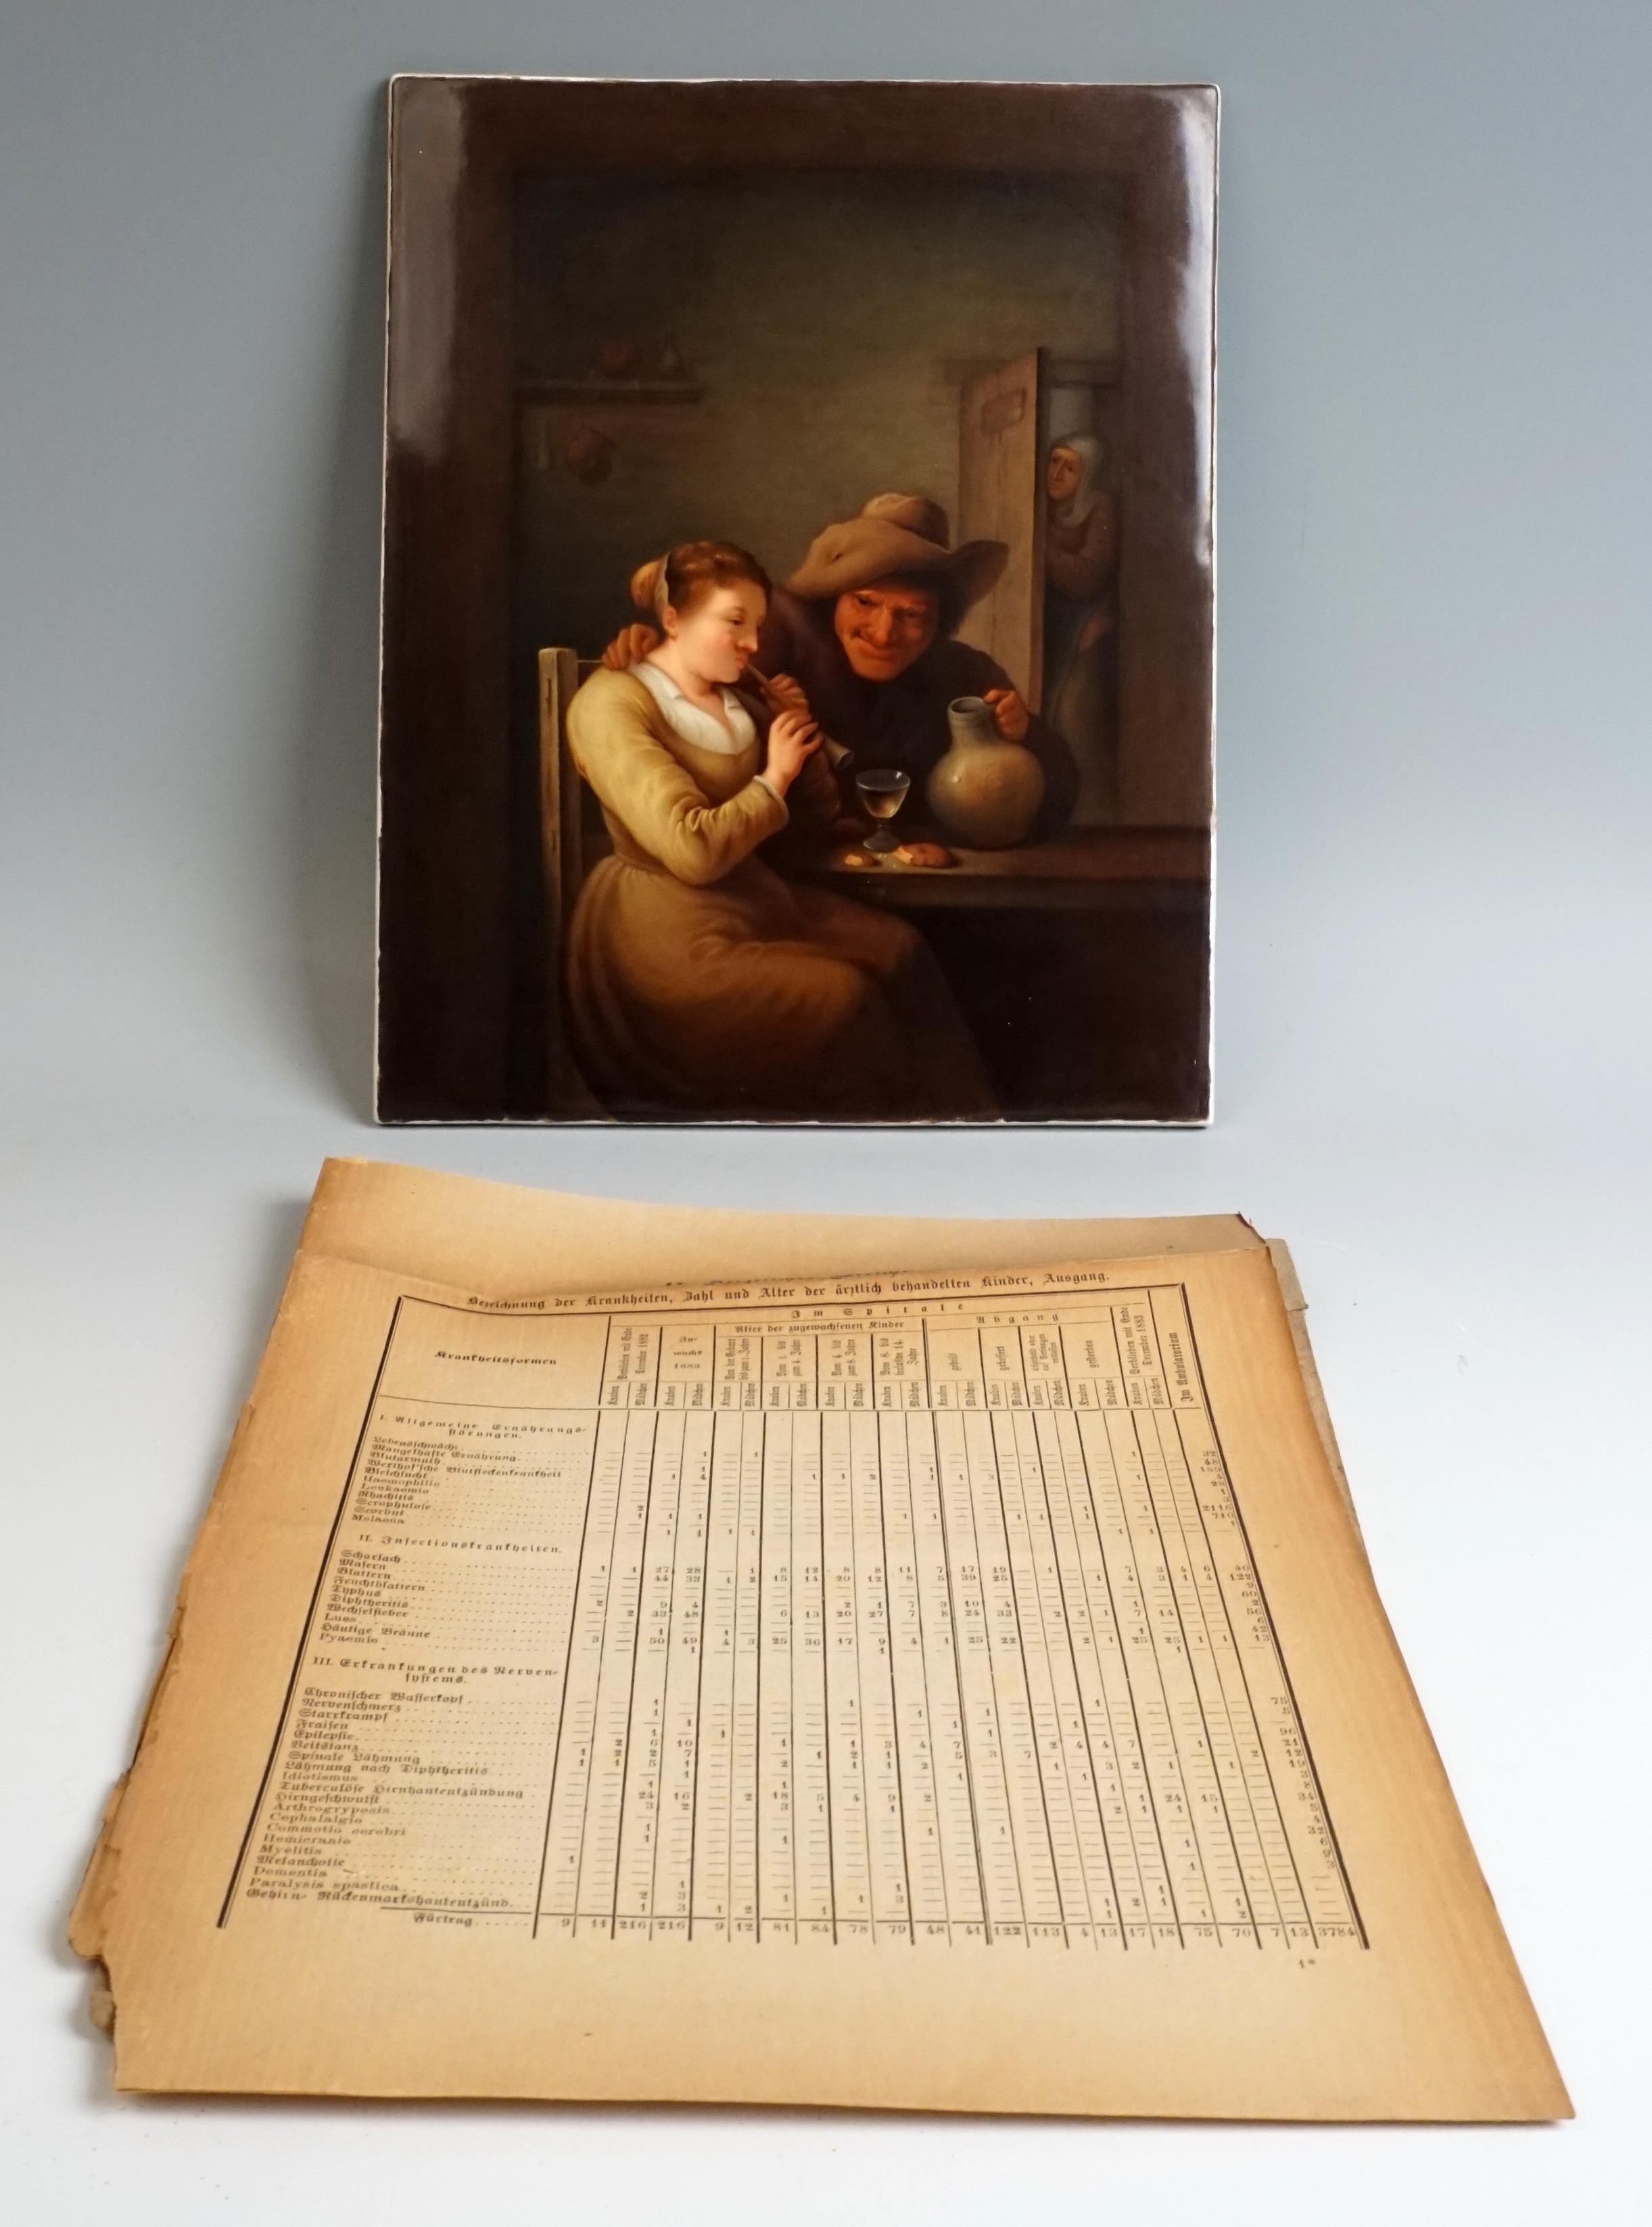 KPM Berlin Porcelain Plaque Flute Playing Girl Genre Scene, Germany, circa 1840 In Good Condition For Sale In Vienna, AT